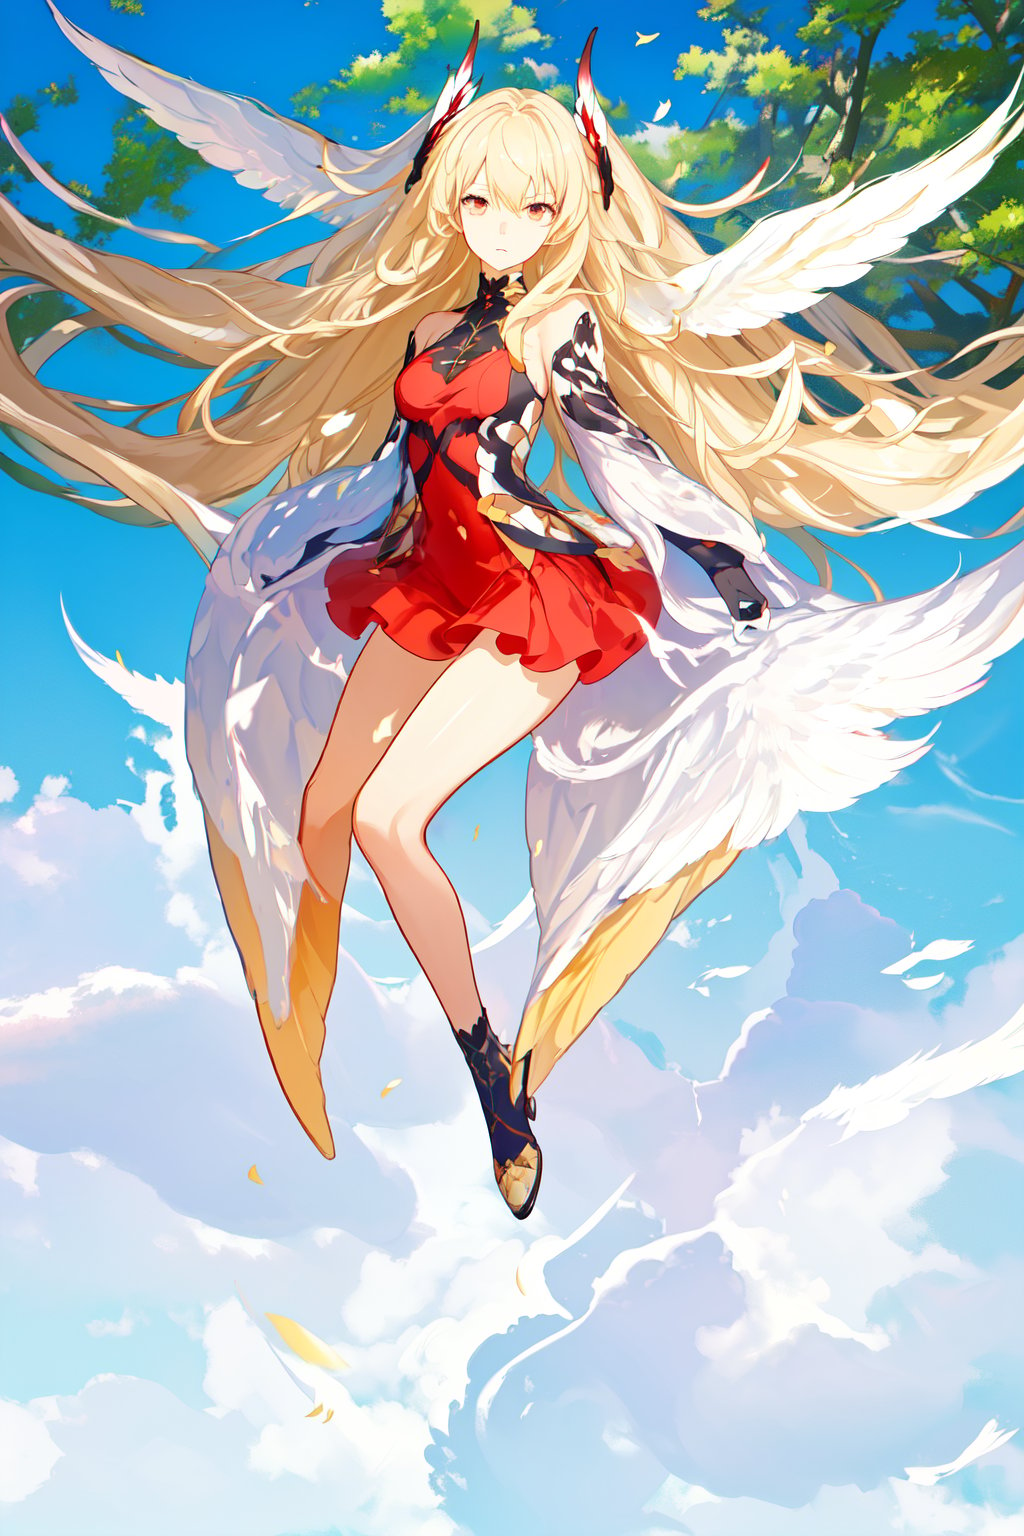 (HAIR AS WING:1.4), (masterpiece:1.2), (best quality), 8K wallpaper, (highres), (ultra detailed:1.2), sharp lines,

(long hair:1.4), (hair like wings:1.3), (wings parallel to head:1.2), (flowing hair:1.1), (anime style:1.2),

(detailed hair:1.2), (hair texture:1.1), (hair highlights:1.1), (hair shadows:1.1), (hair color:1.1), (hair movement:1.1),

(solo:1.1), (full body:1.1), (female:1.1), (looking at viewer:1.1), (calm expression:1.1), (soft skin:1.1),

(forest background:1.1), (sunlight:1.1), (sunbeams:1.1), (leaves:1.1), (trees:1.1), (detailed background:1.1),